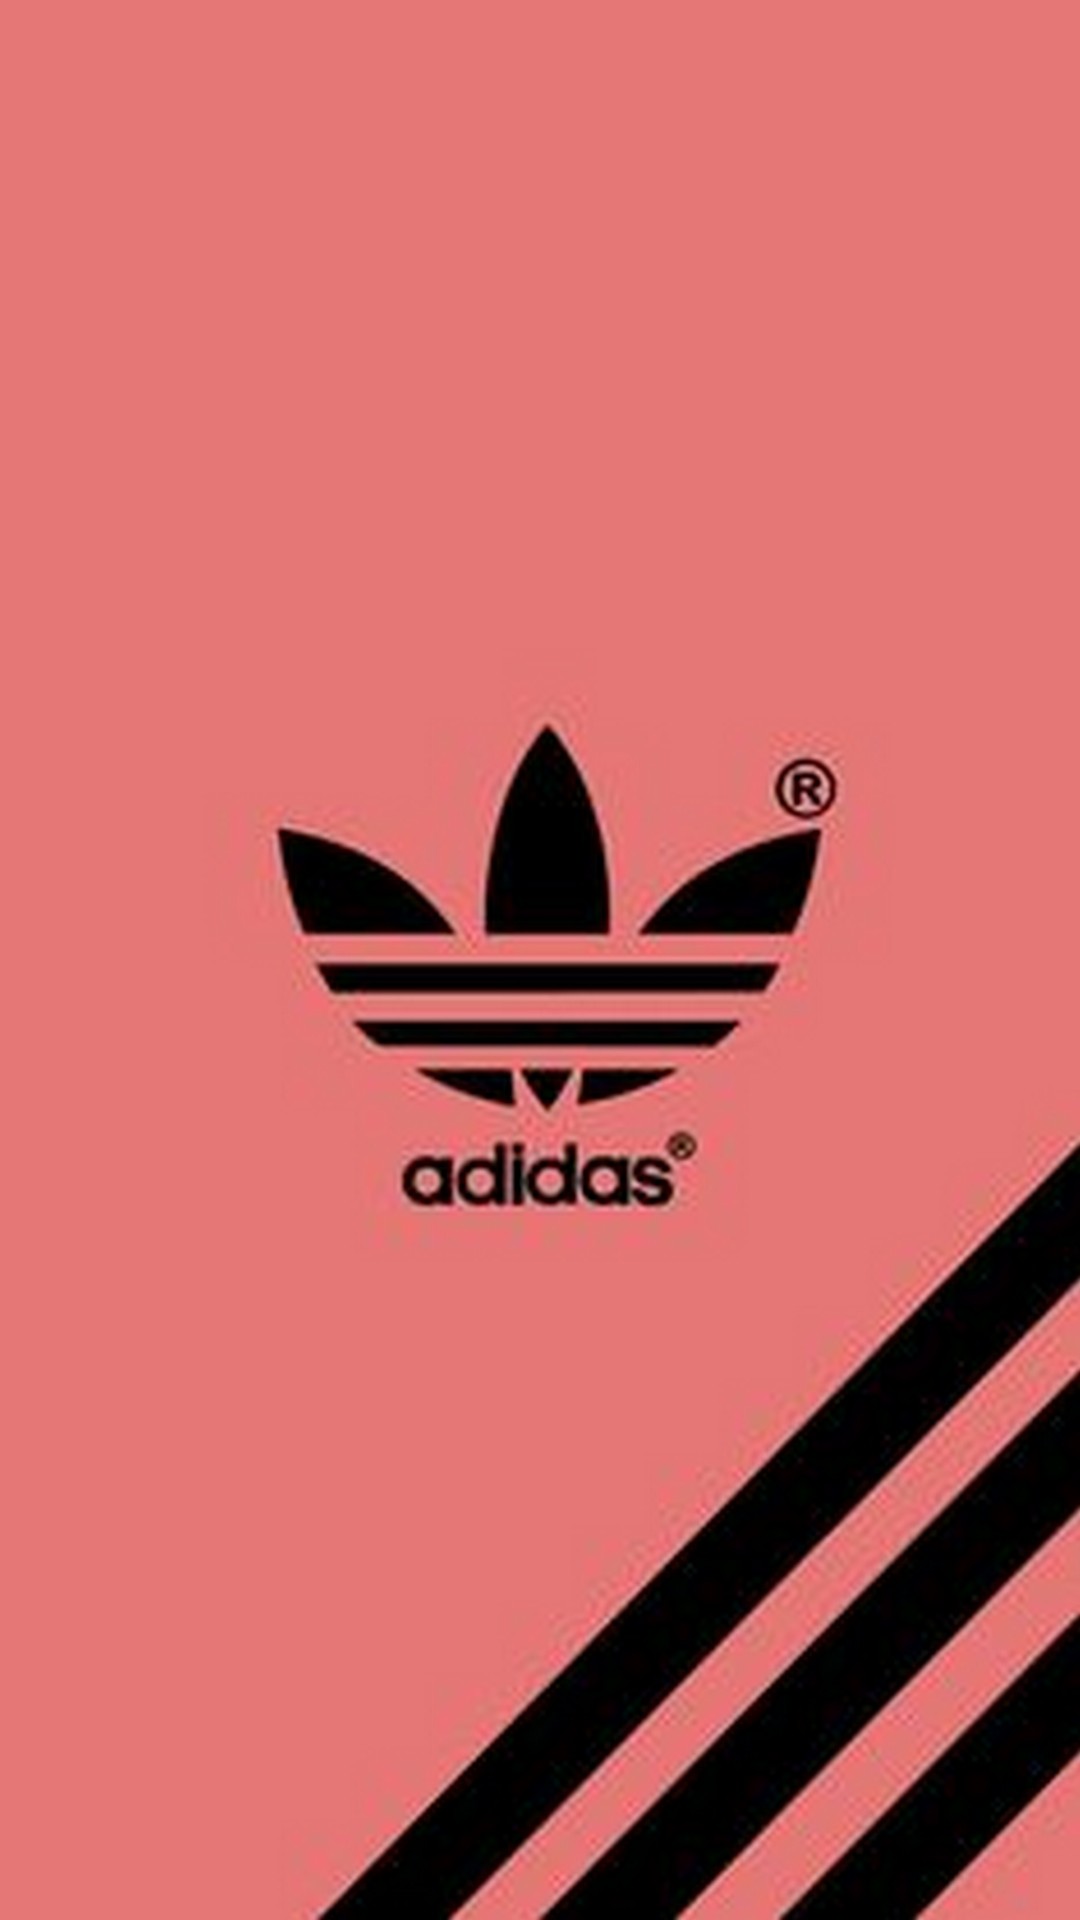 adidas wallpapers for iphone x